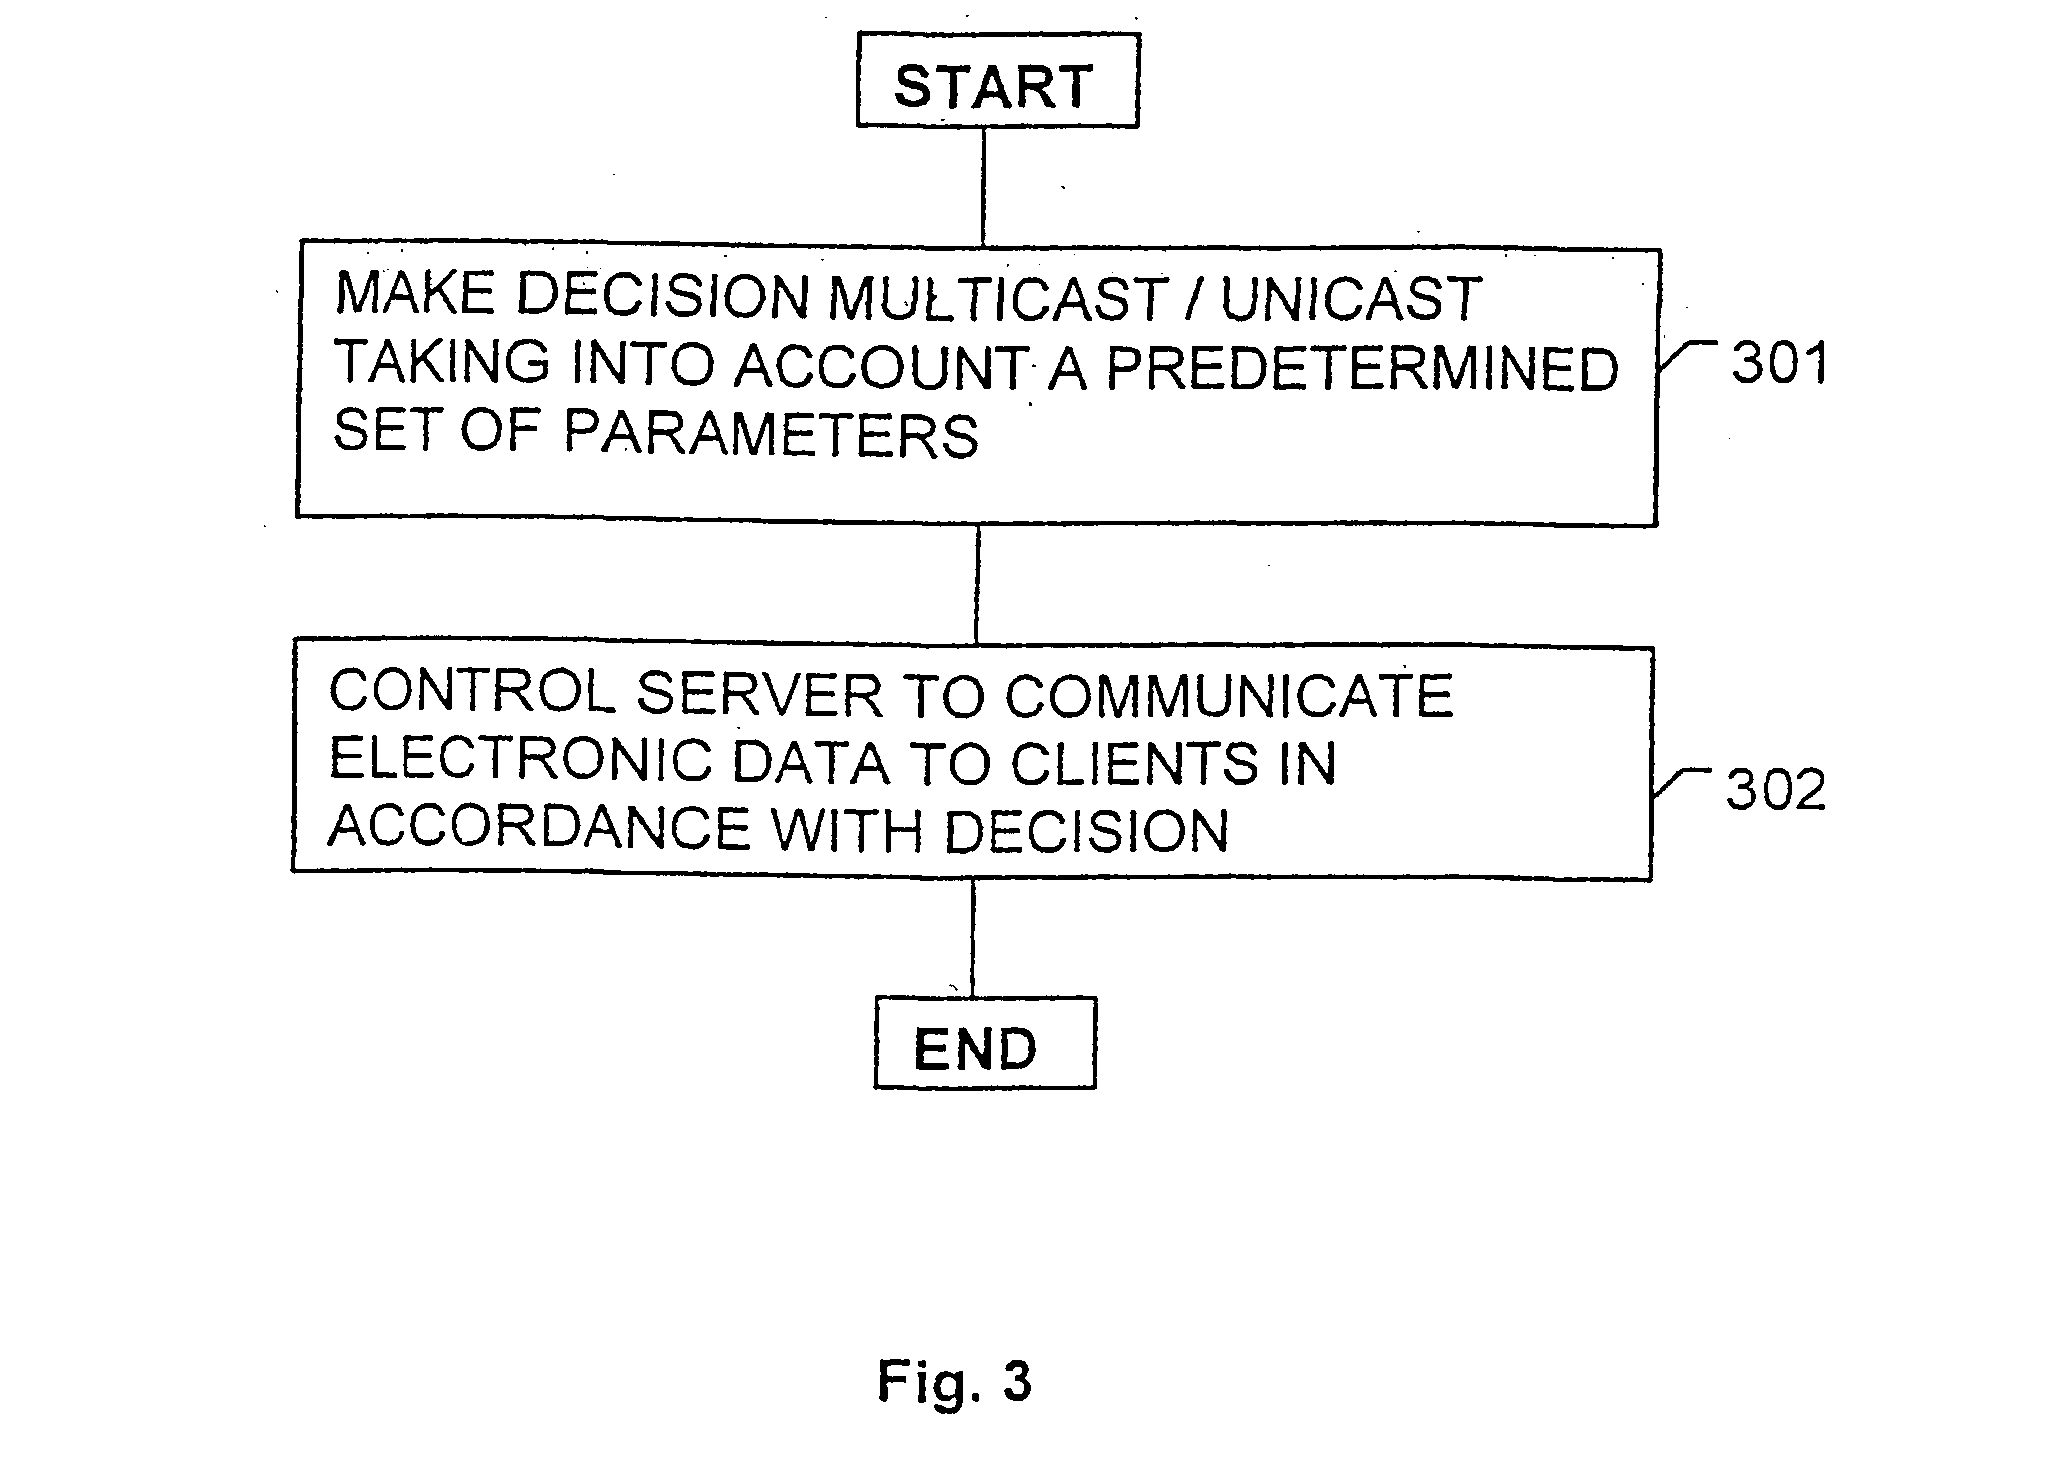 Communication of electronic data via a network infrastructure